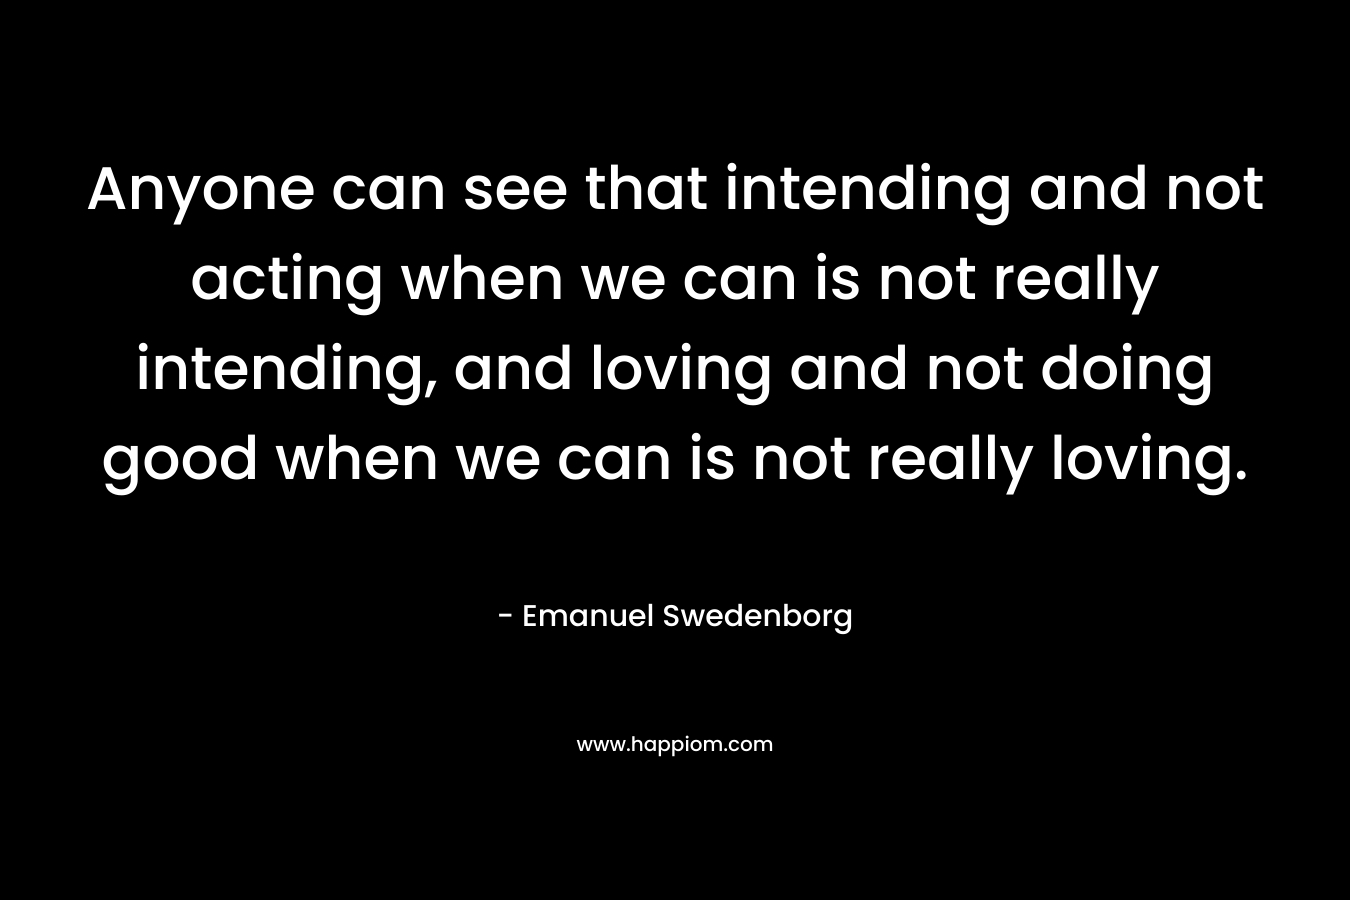 Anyone can see that intending and not acting when we can is not really intending, and loving and not doing good when we can is not really loving. – Emanuel Swedenborg